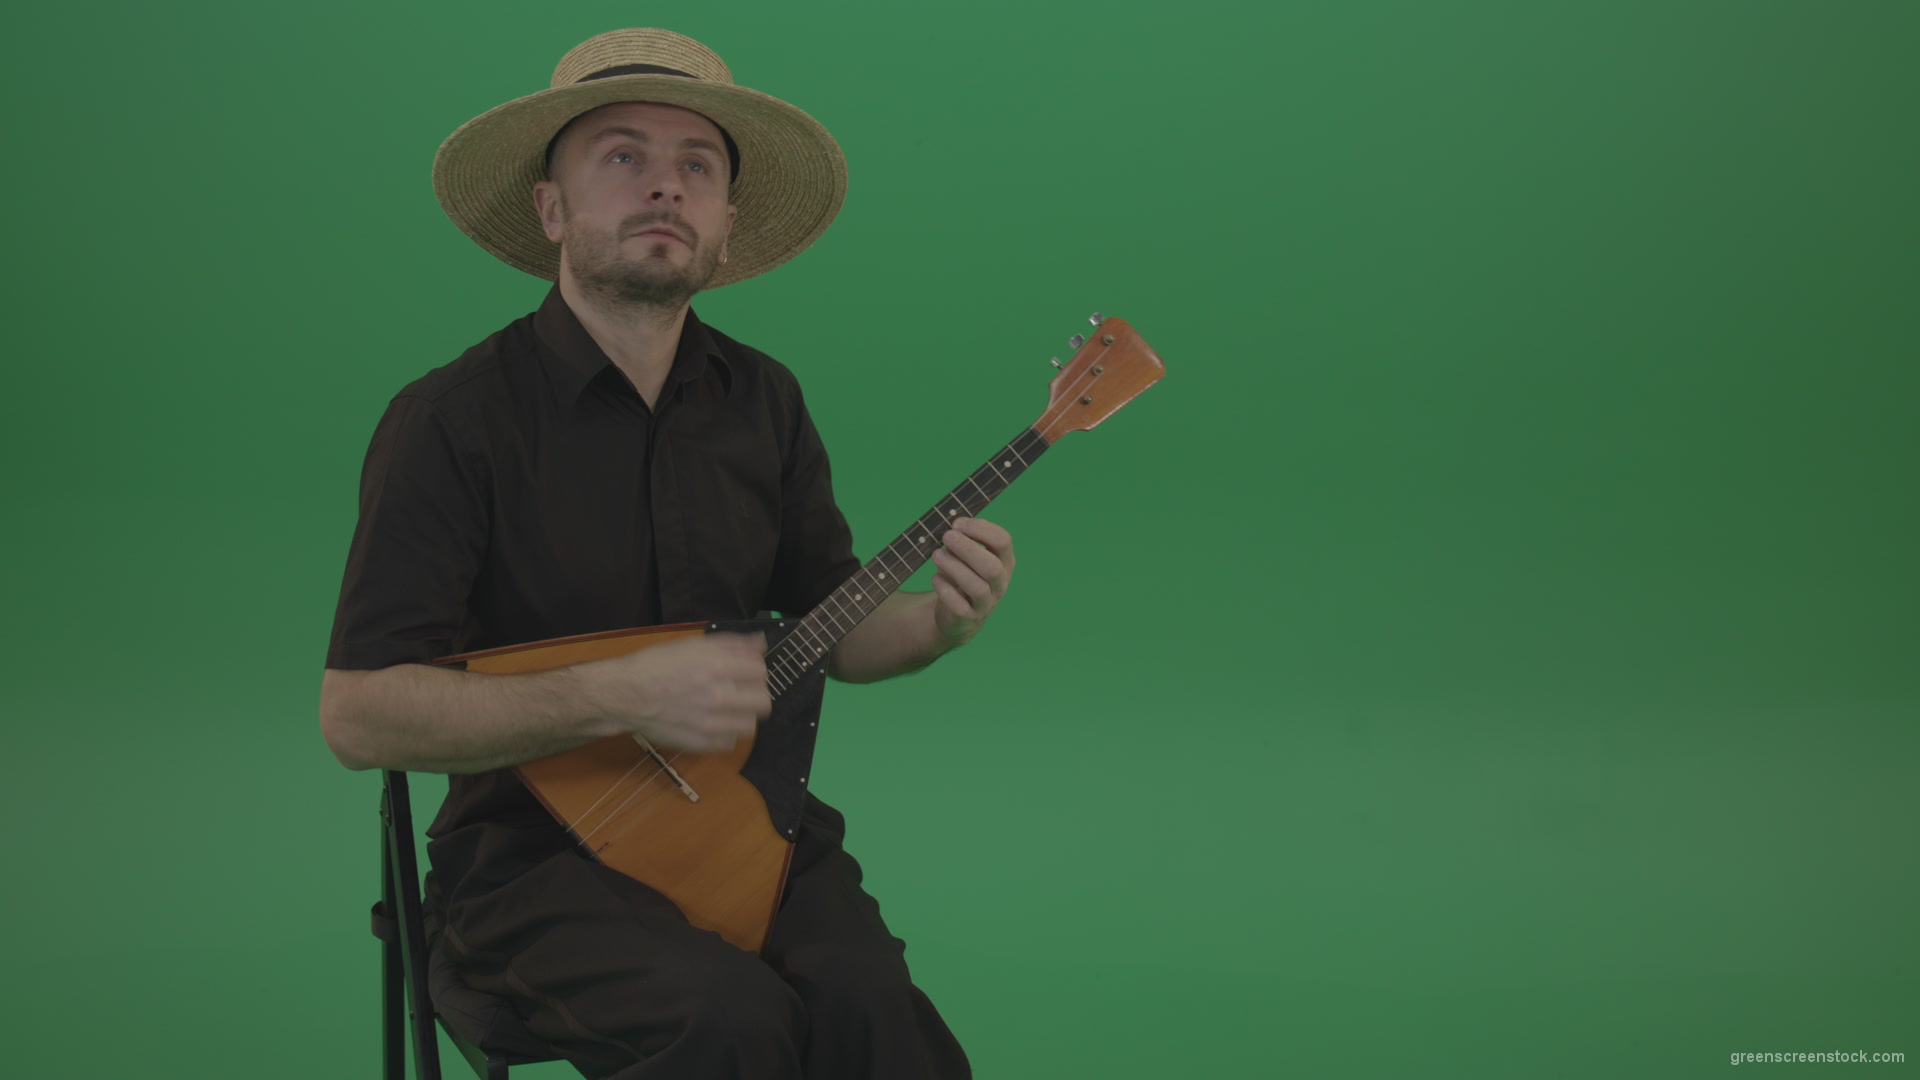 vj video background Man-from-village-play-Balalaika-music-instrument-isolated-on-green-screen_003